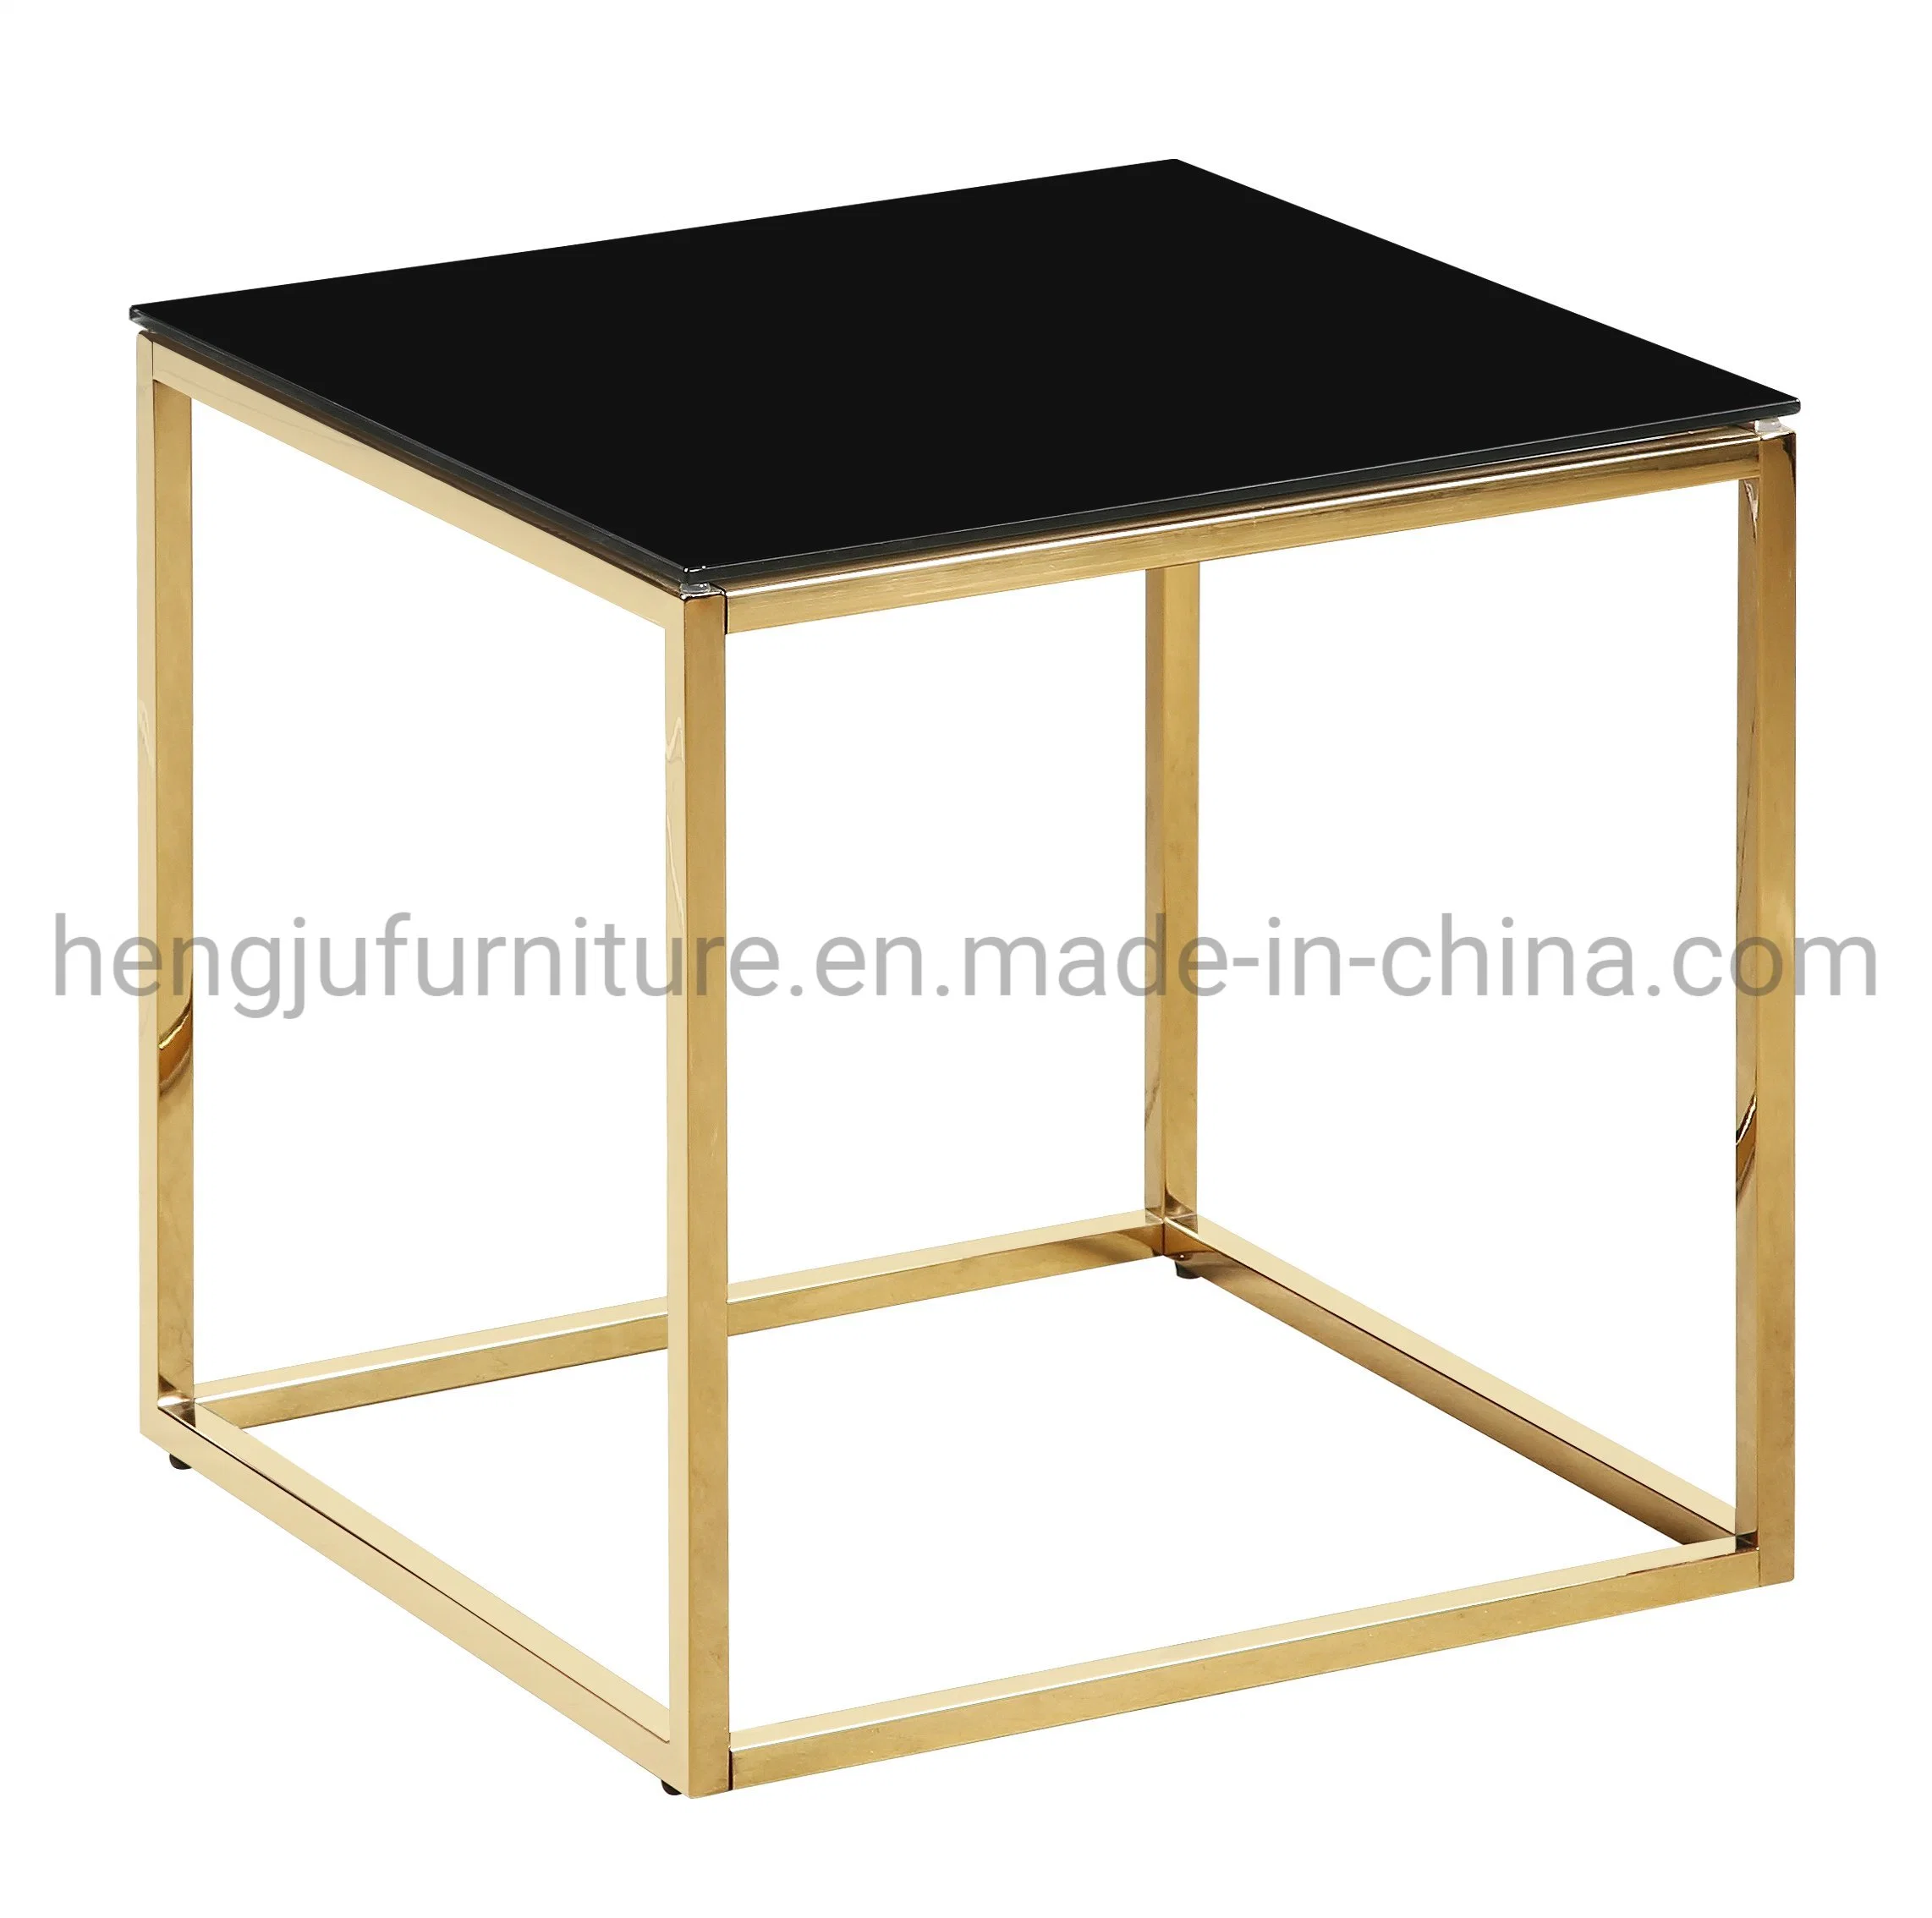 Modern Gold Side Table Stainless Steel Legs Square Tempered Glass Top Nesting Coffee Table Set End Table Sofa Table Living Room Table Bedroom Table Golden